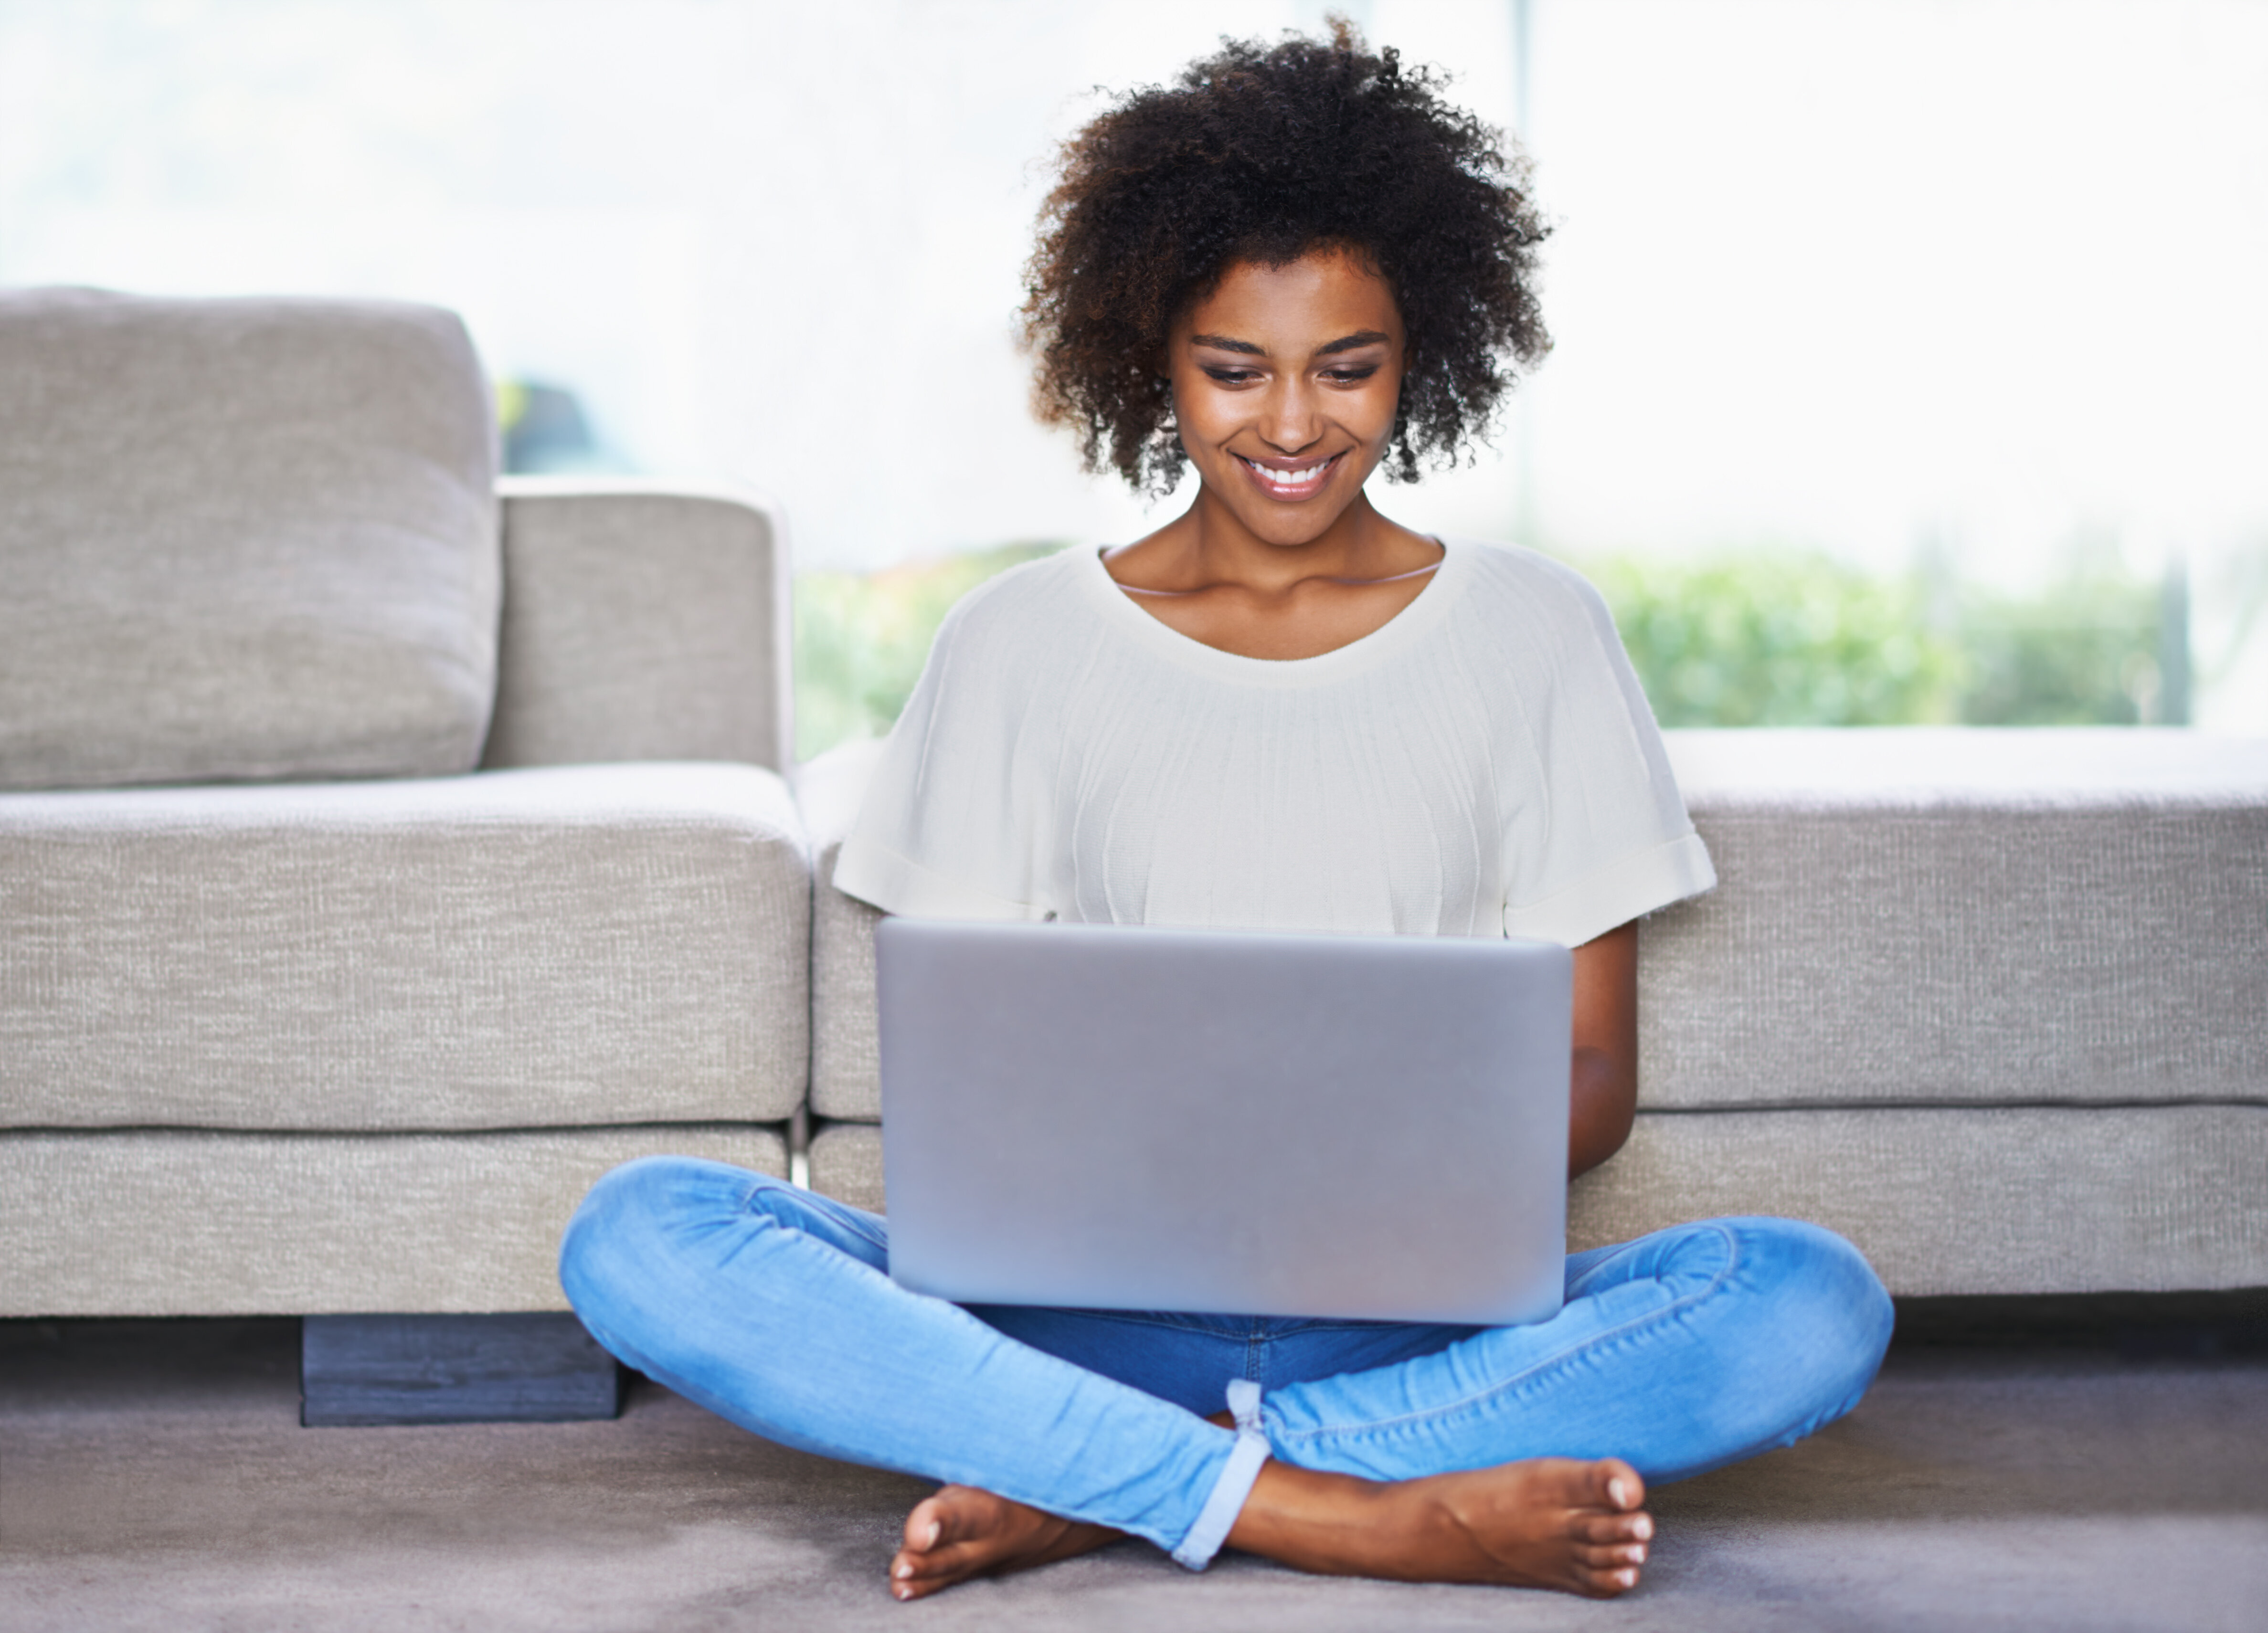 Woman sitting on the floor, legs crossed, smiling while using a laptop in a cozy living room with a couch in the background